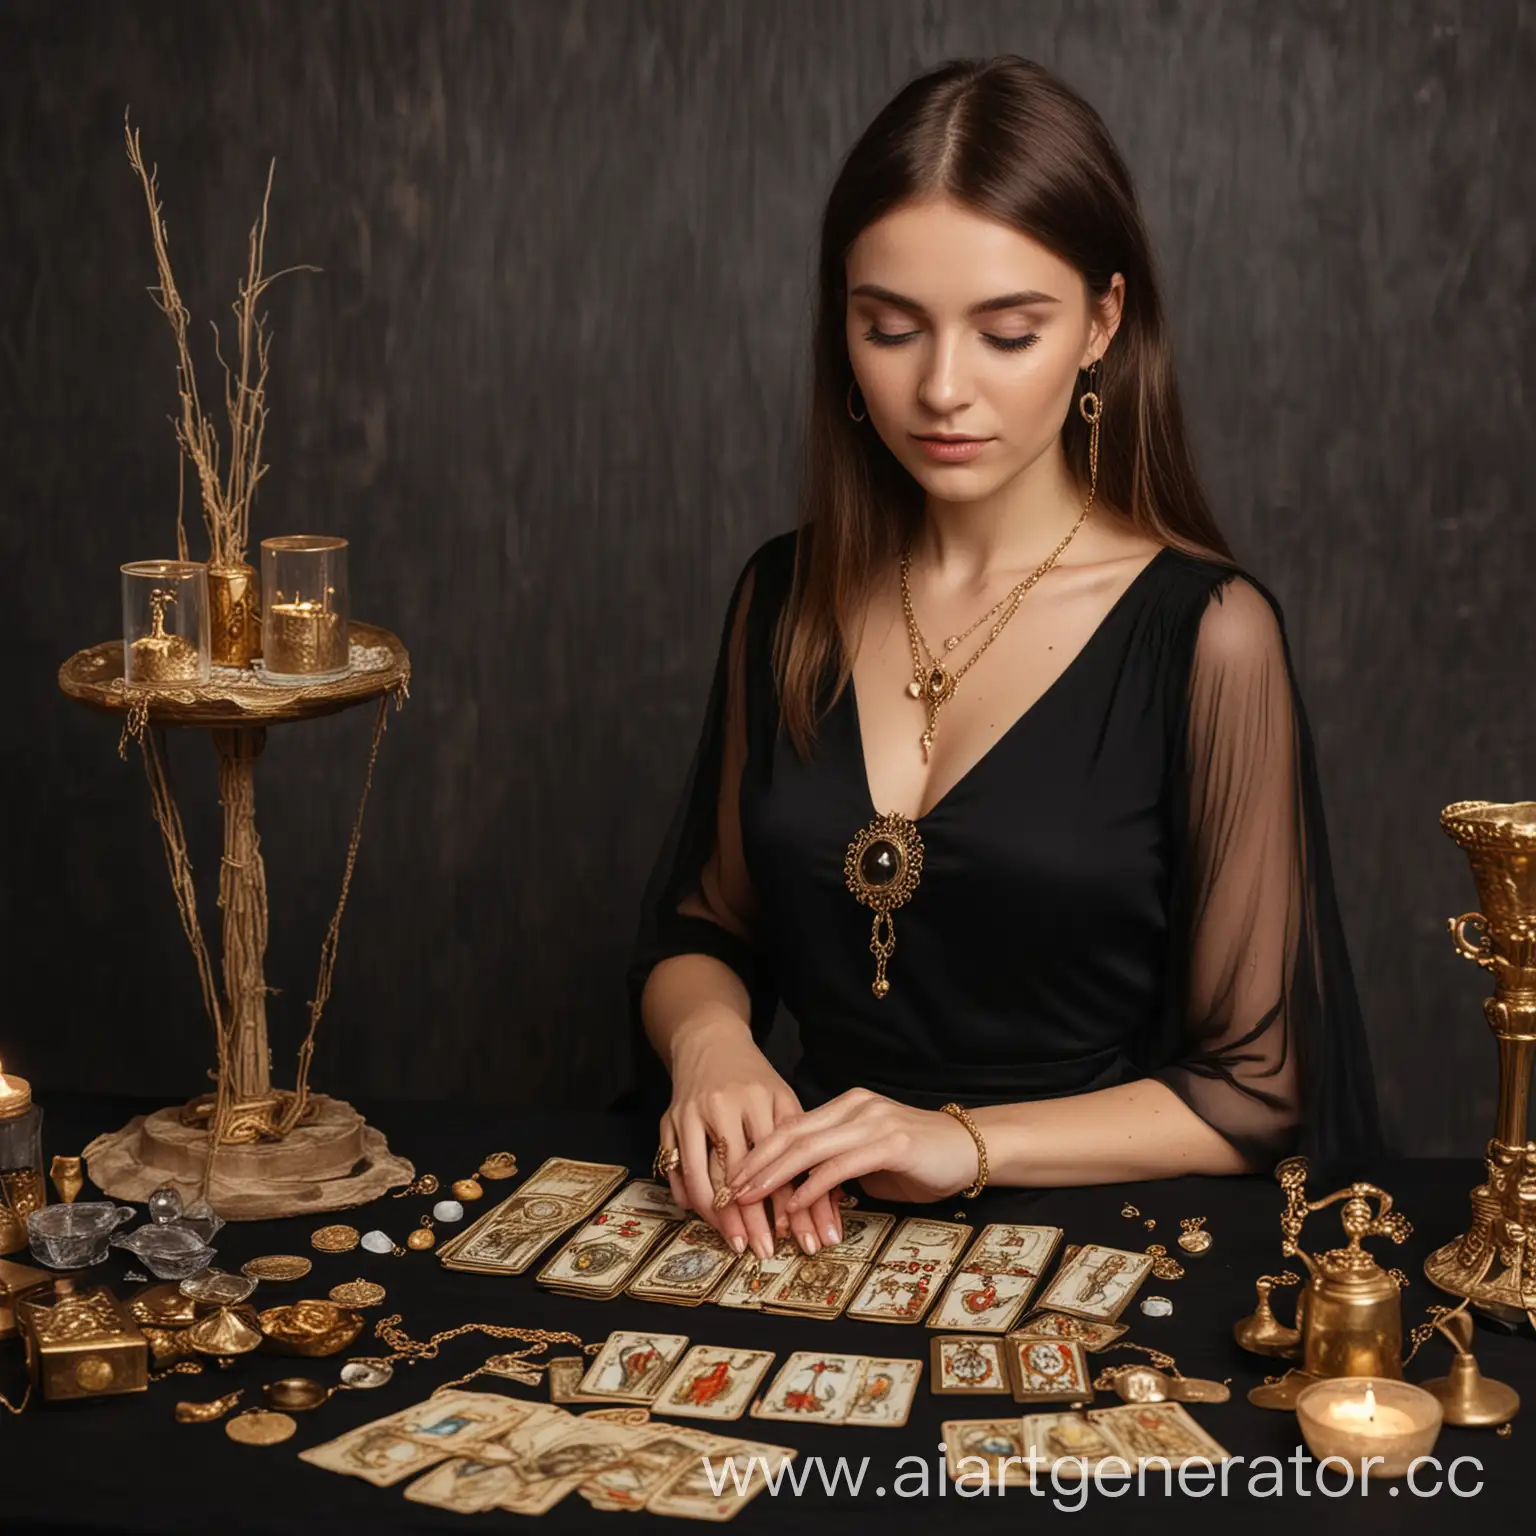 Woman-in-Black-Dress-Engaged-in-Tarot-Fortune-Telling-with-Gold-Jewelry